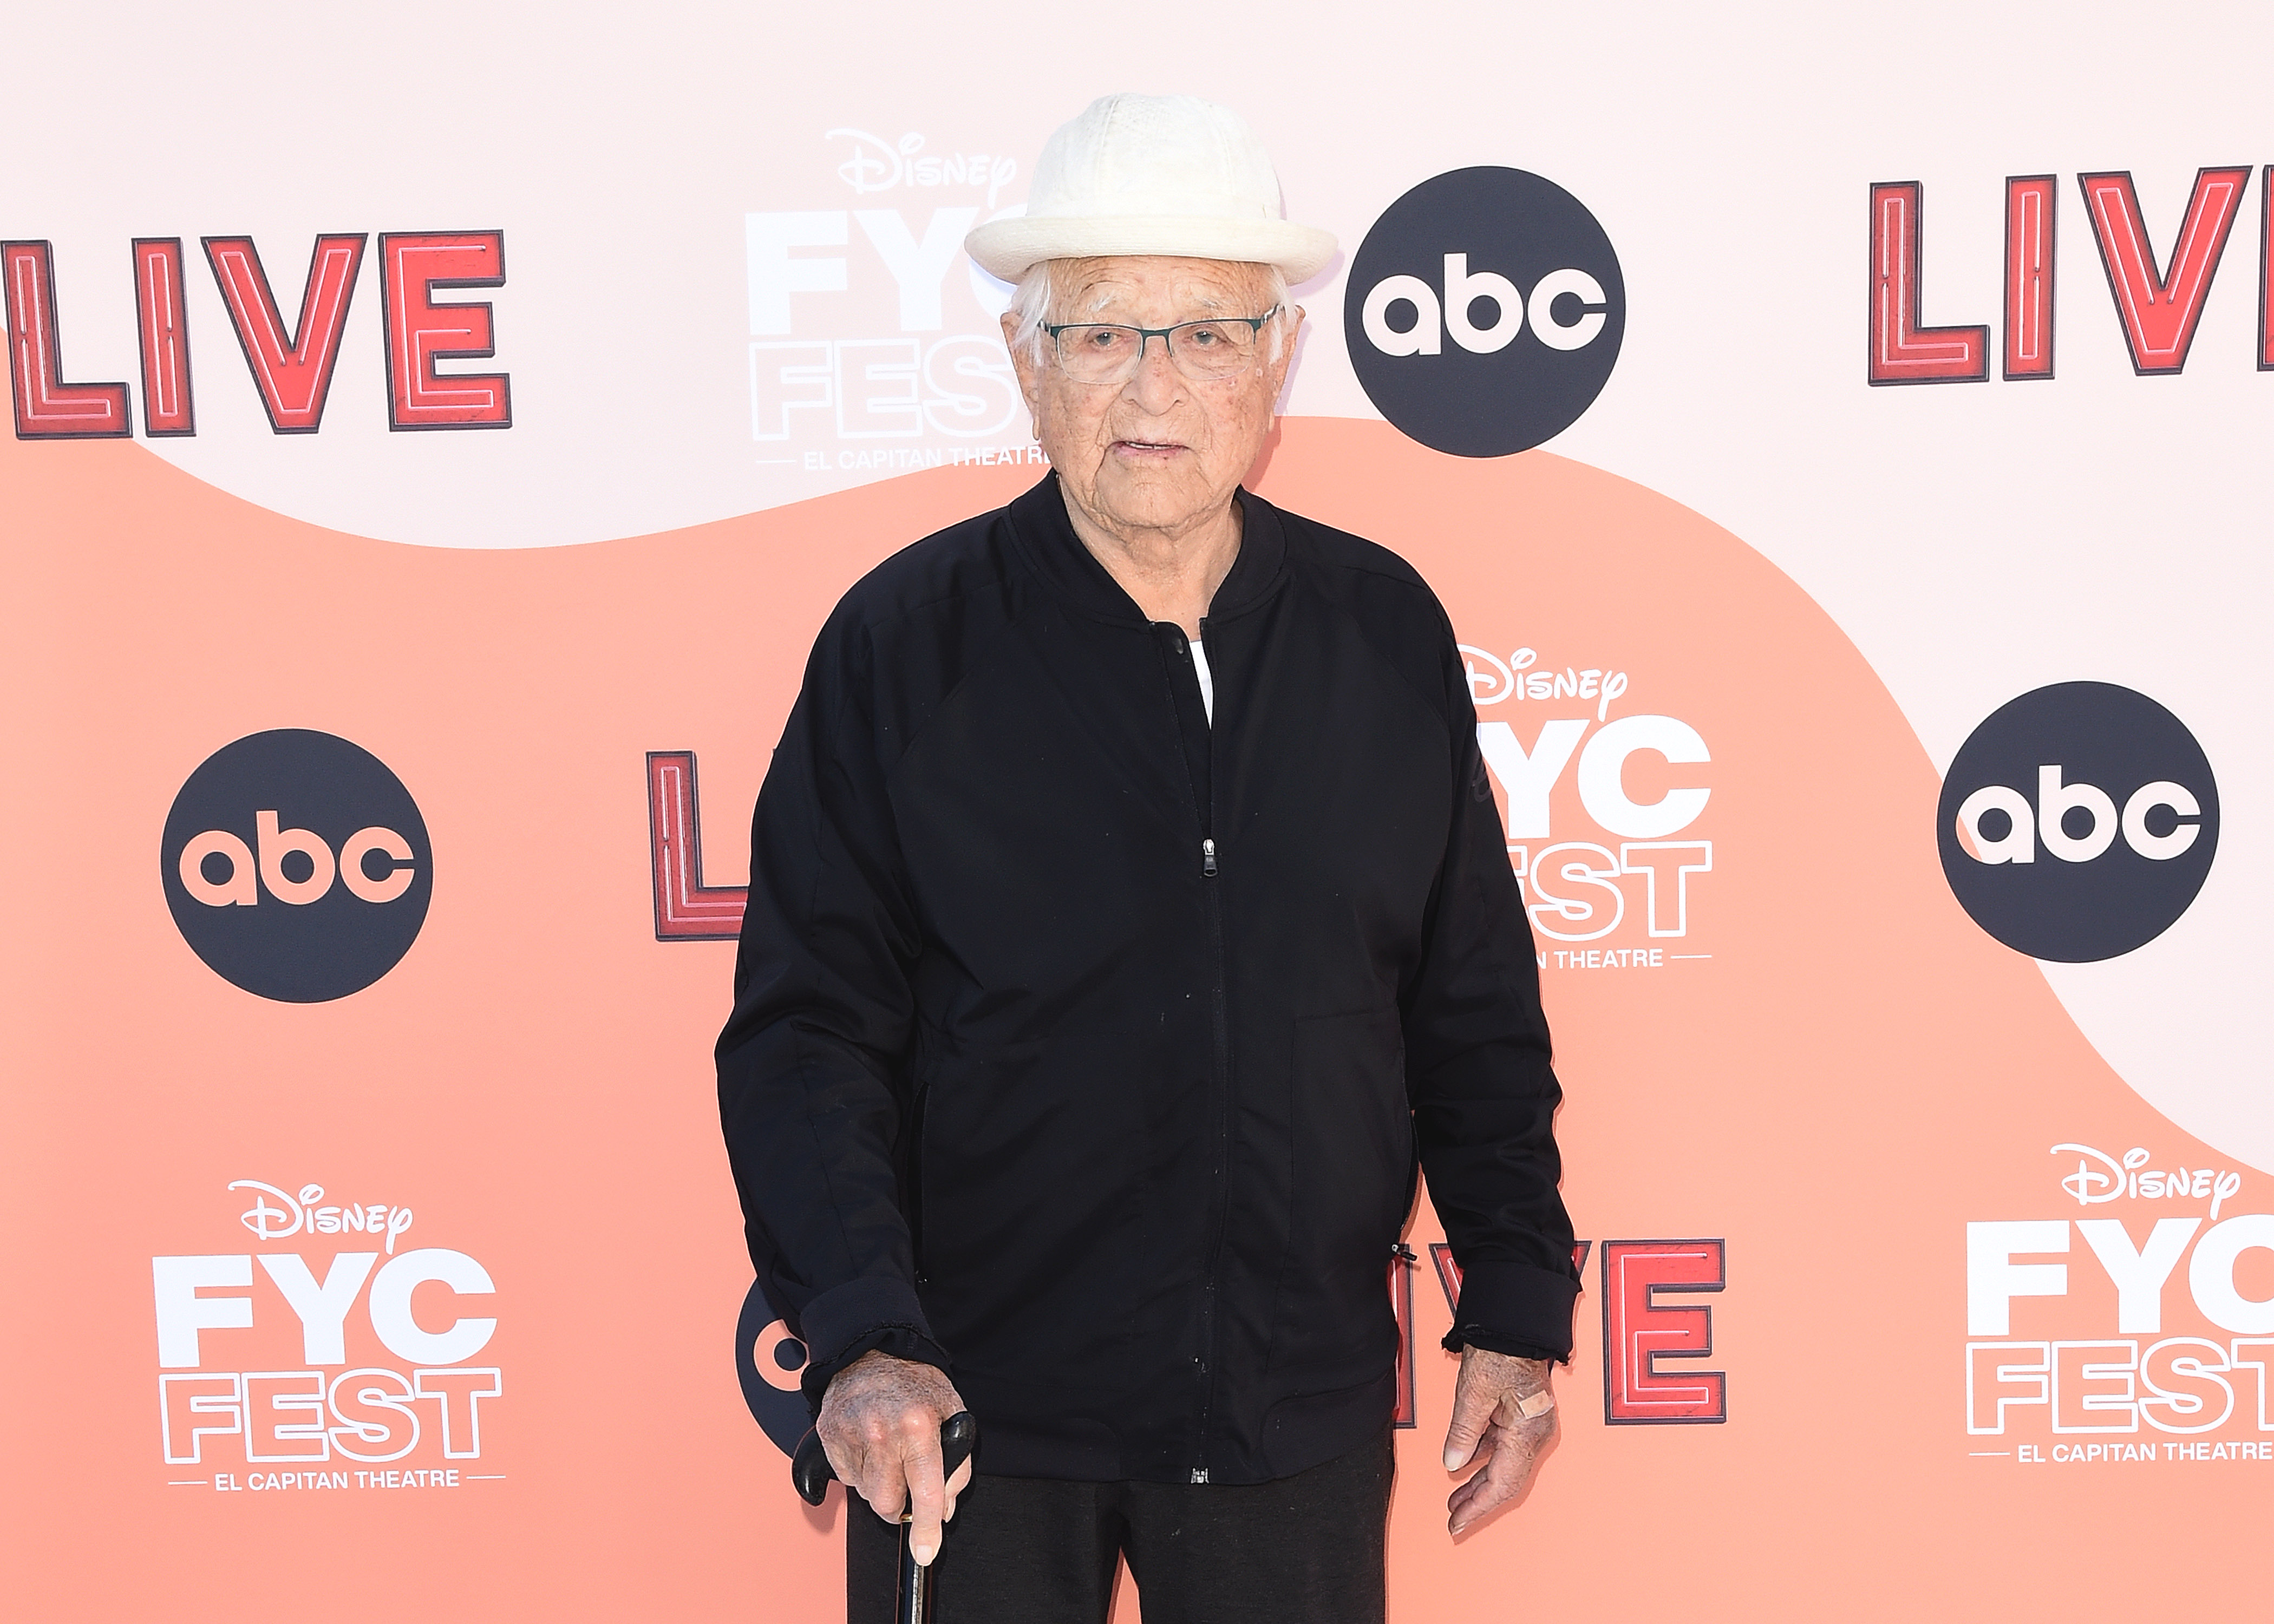 What Aspect Of Laughter Is Norman Lear's Favorite?